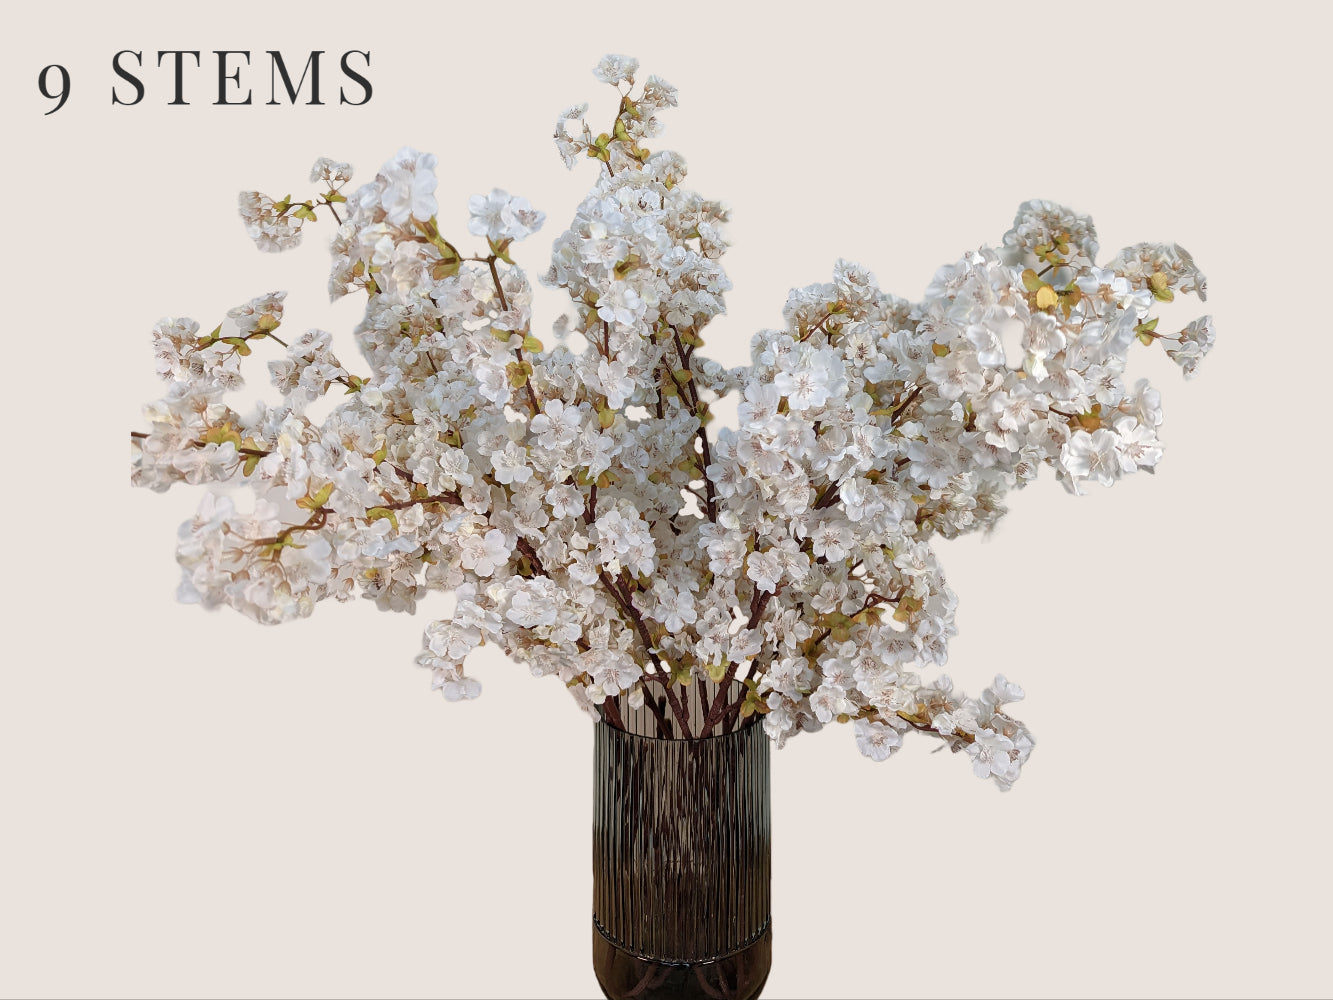 Nine lifelike cream-colored cherry blossom stems arranged in a fluted smokey gray vase, standing against a beige background. Each 40-inch stem features three branches with light green buds and brown lifelike stems. Mauve and pink stamens add to the realistic appearance of the artificial flowers.